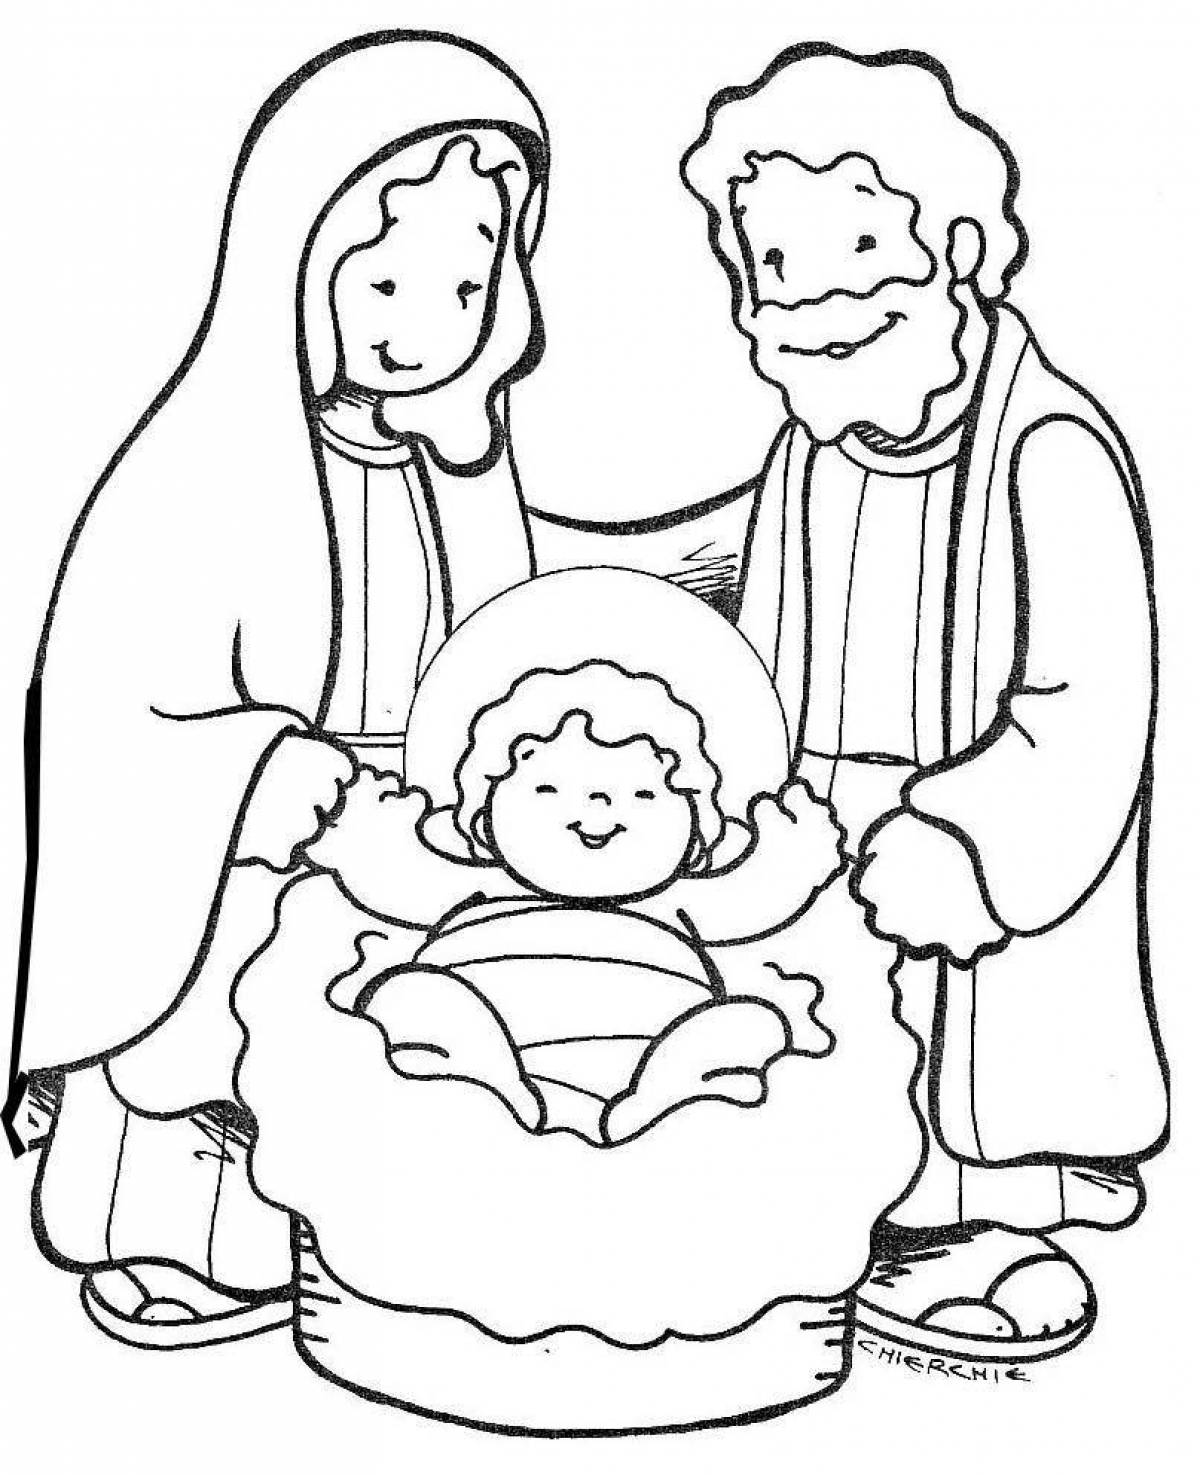 Coloring book divine illustration of the birth of jesus christ